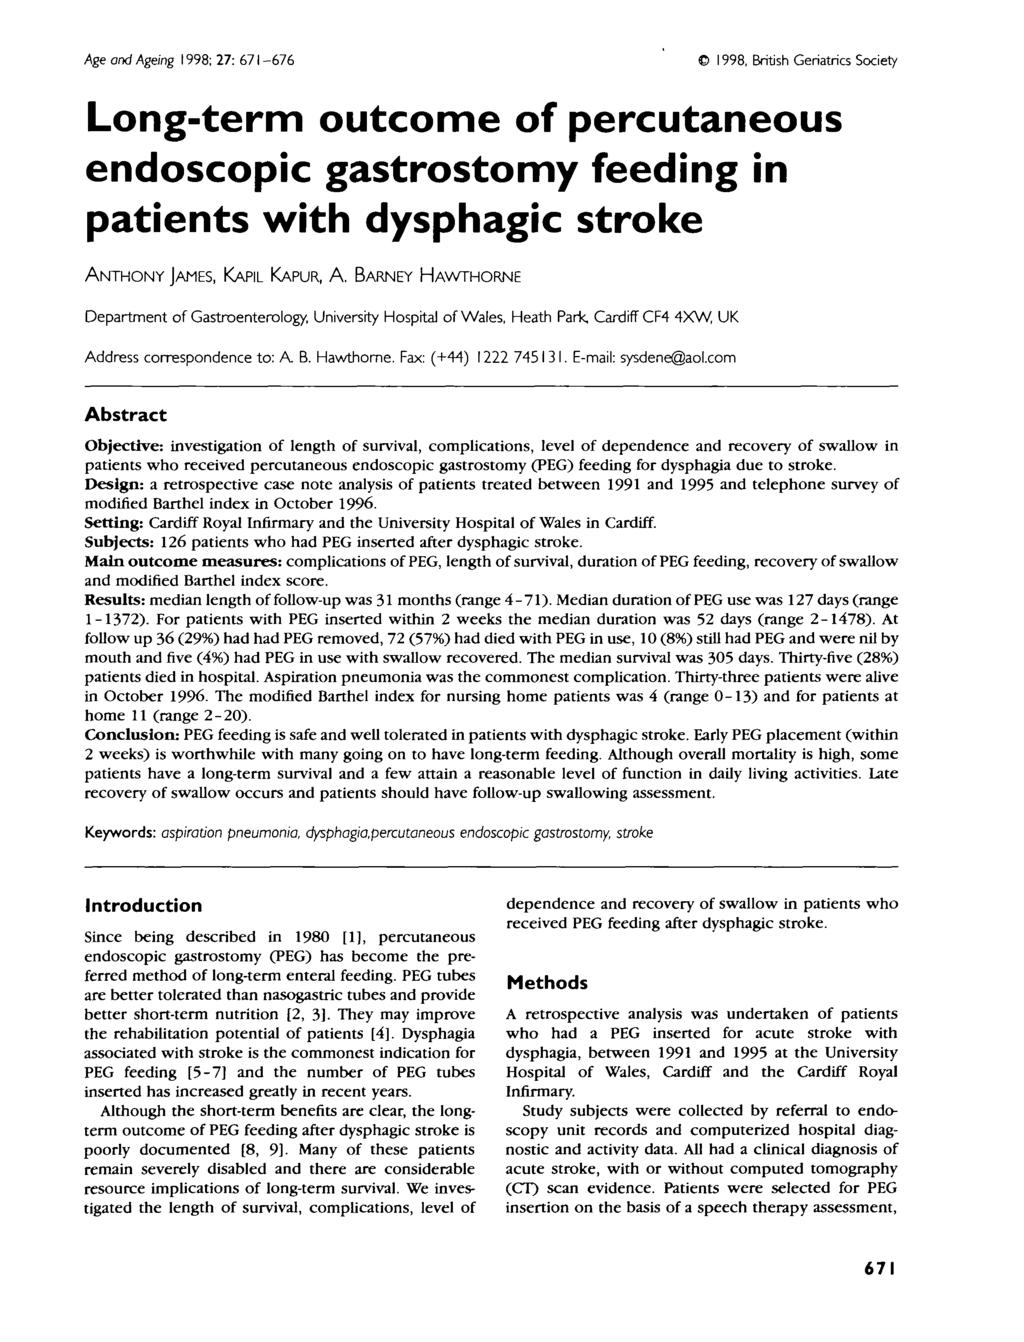 Age and Ageing 998; 7: 67-676 998, British Geriatrics Society Long-term outcome of percutaneous endoscopic gastrostomy feeding in patients with dysphagic stroke ANTHONY JAMES, KAPIL KAPUR, A.